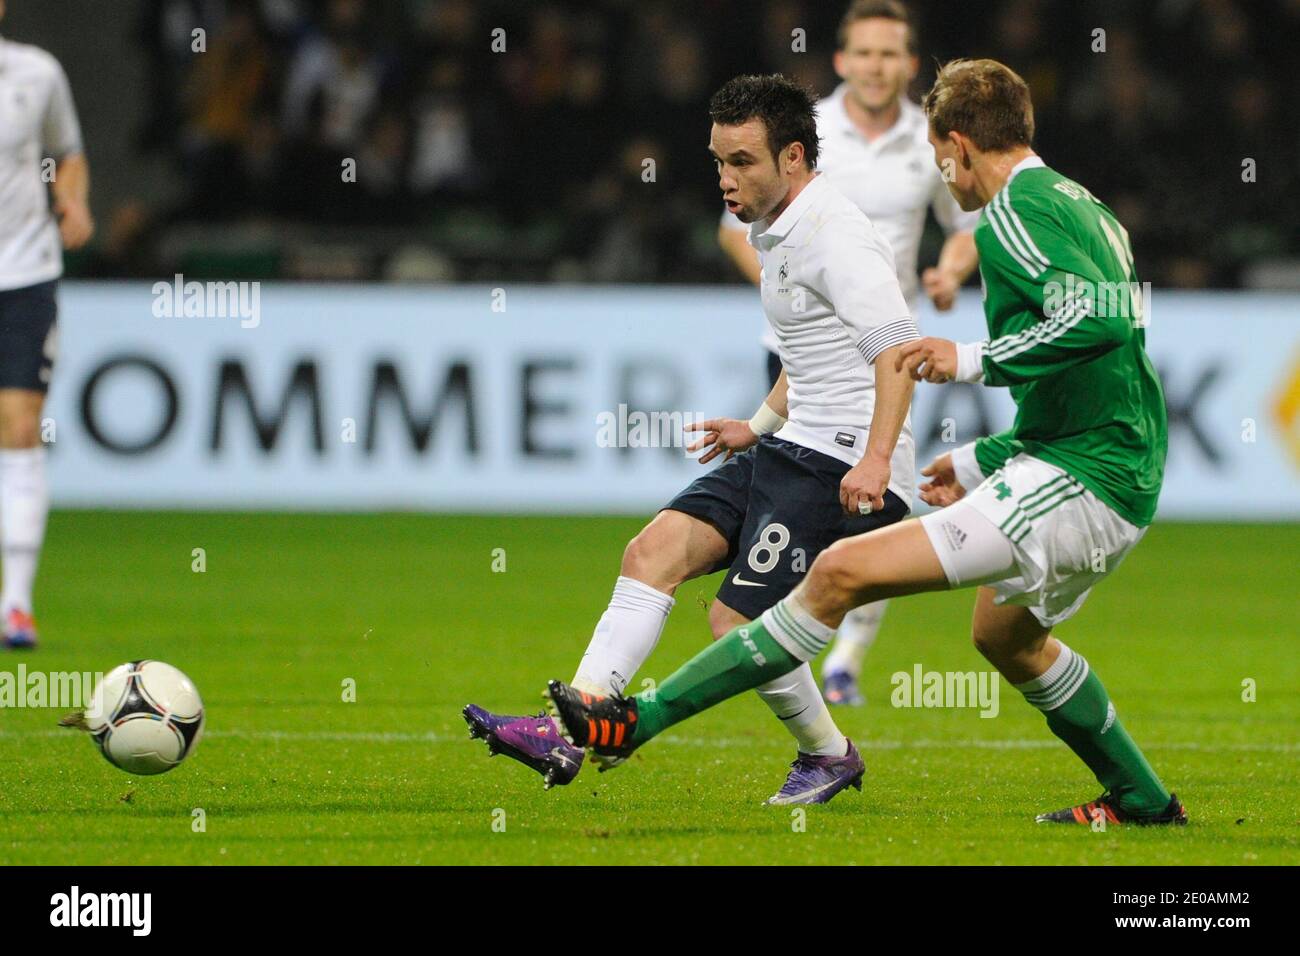 France's Mathieu Valbuena during the international Friendly soccer match, Germany vs France at the Weser stadium in Bremen, Germany on February 29, 2012. France won 2-1. Photo by Henri Szwarc/ABACAPRESS.COM Stock Photo